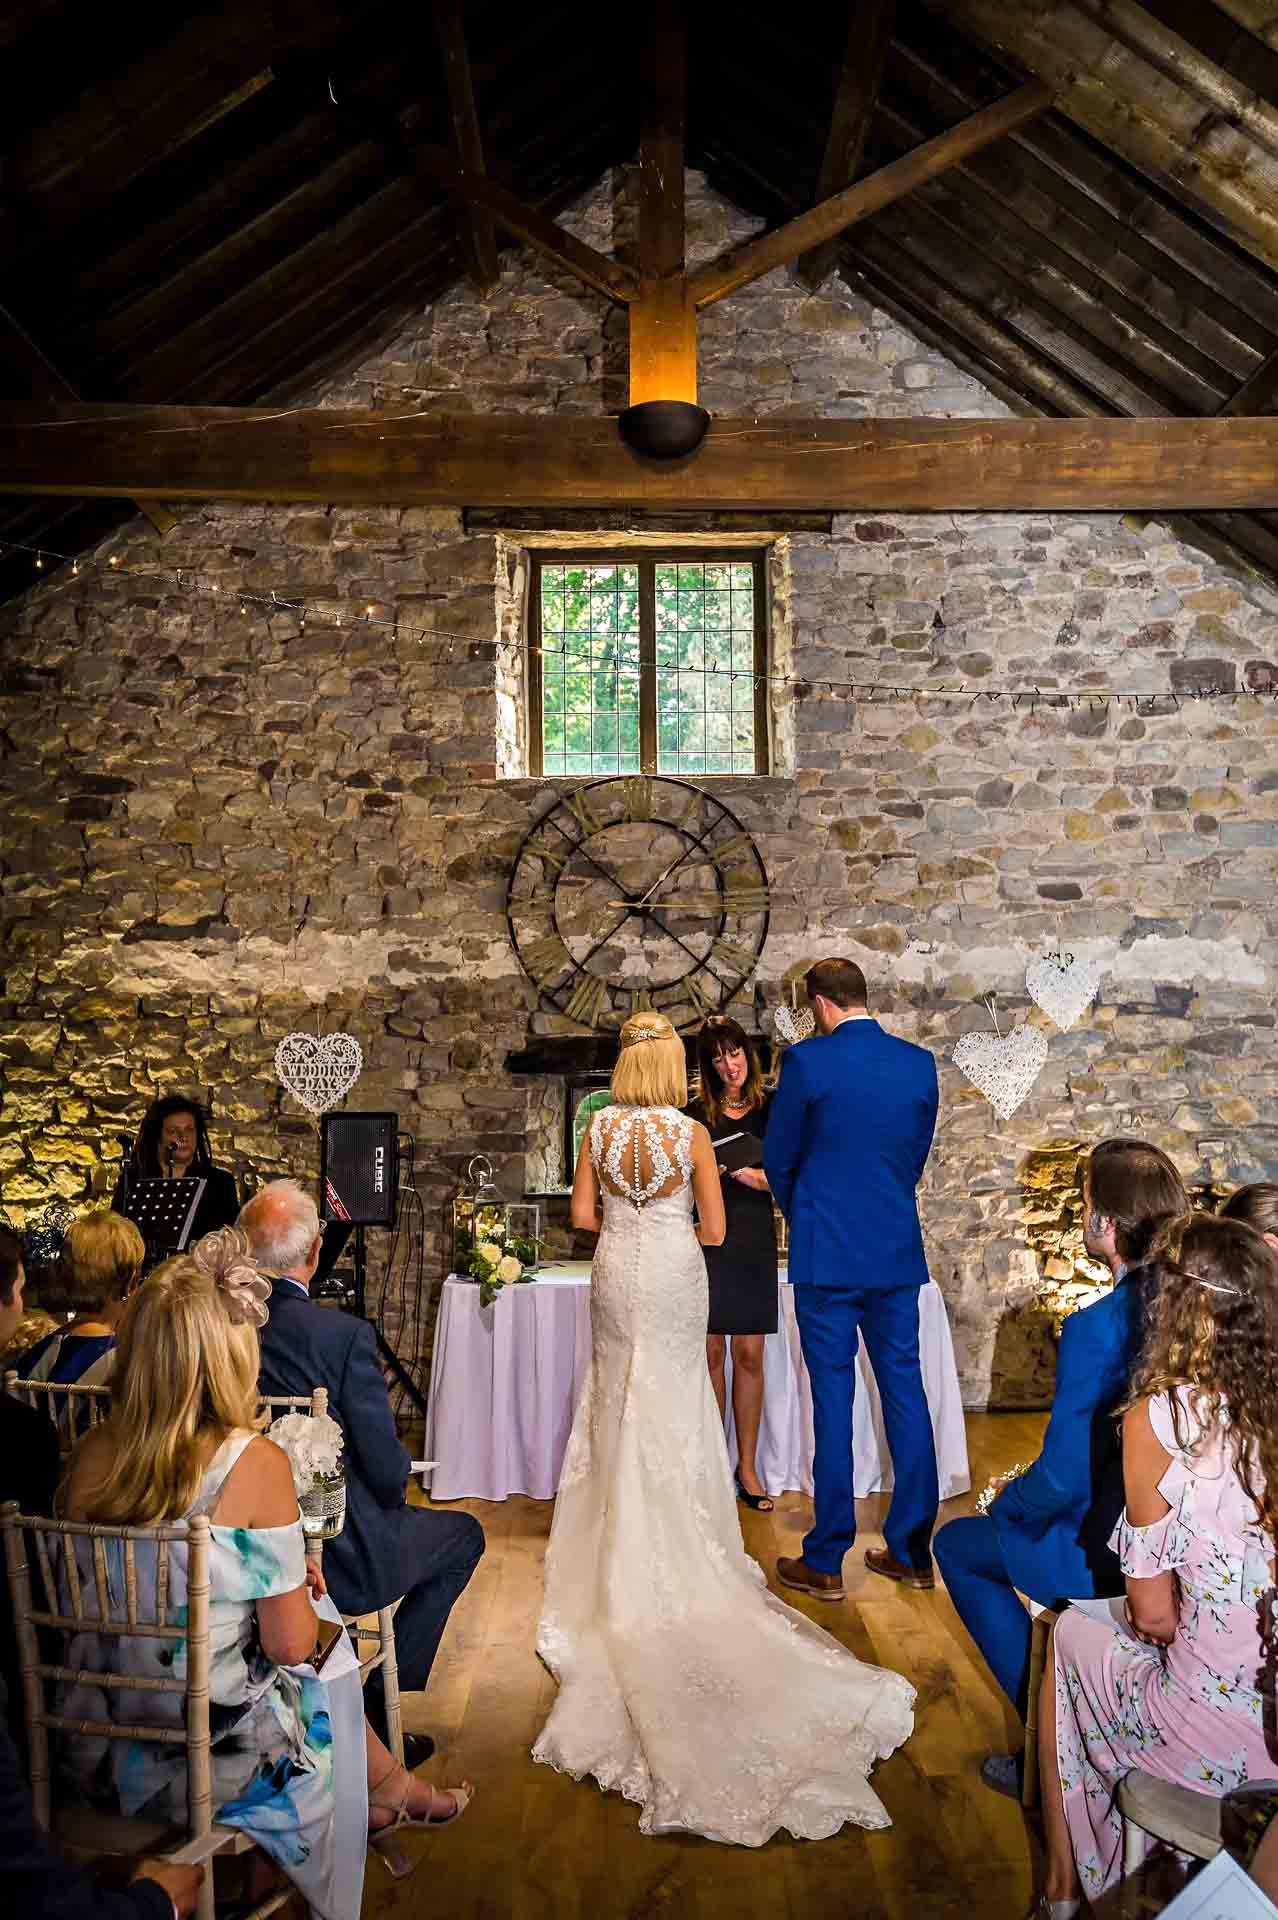 The Bride and Groom with the register in the Old Barn